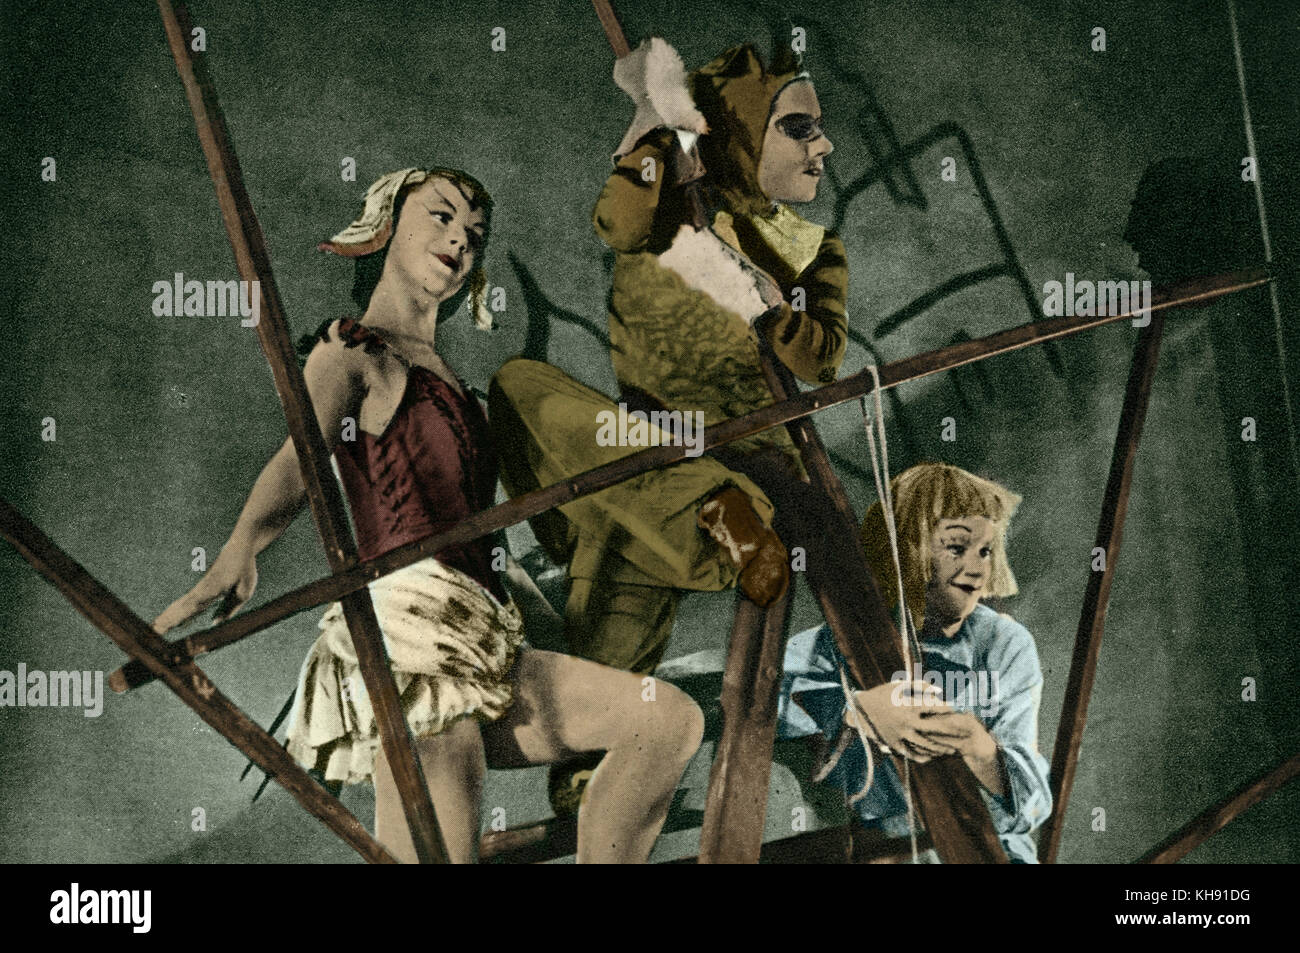 PROKOFIEV, Sergei Sergeyevich - c.1947, production of 'Peter and the Wolf', with Ballet Rambert (Annette Chappell, Sonia Arara, Lulu Oukes . Russian composer, 27 April 1891 - 5 March 1953. Stock Photo